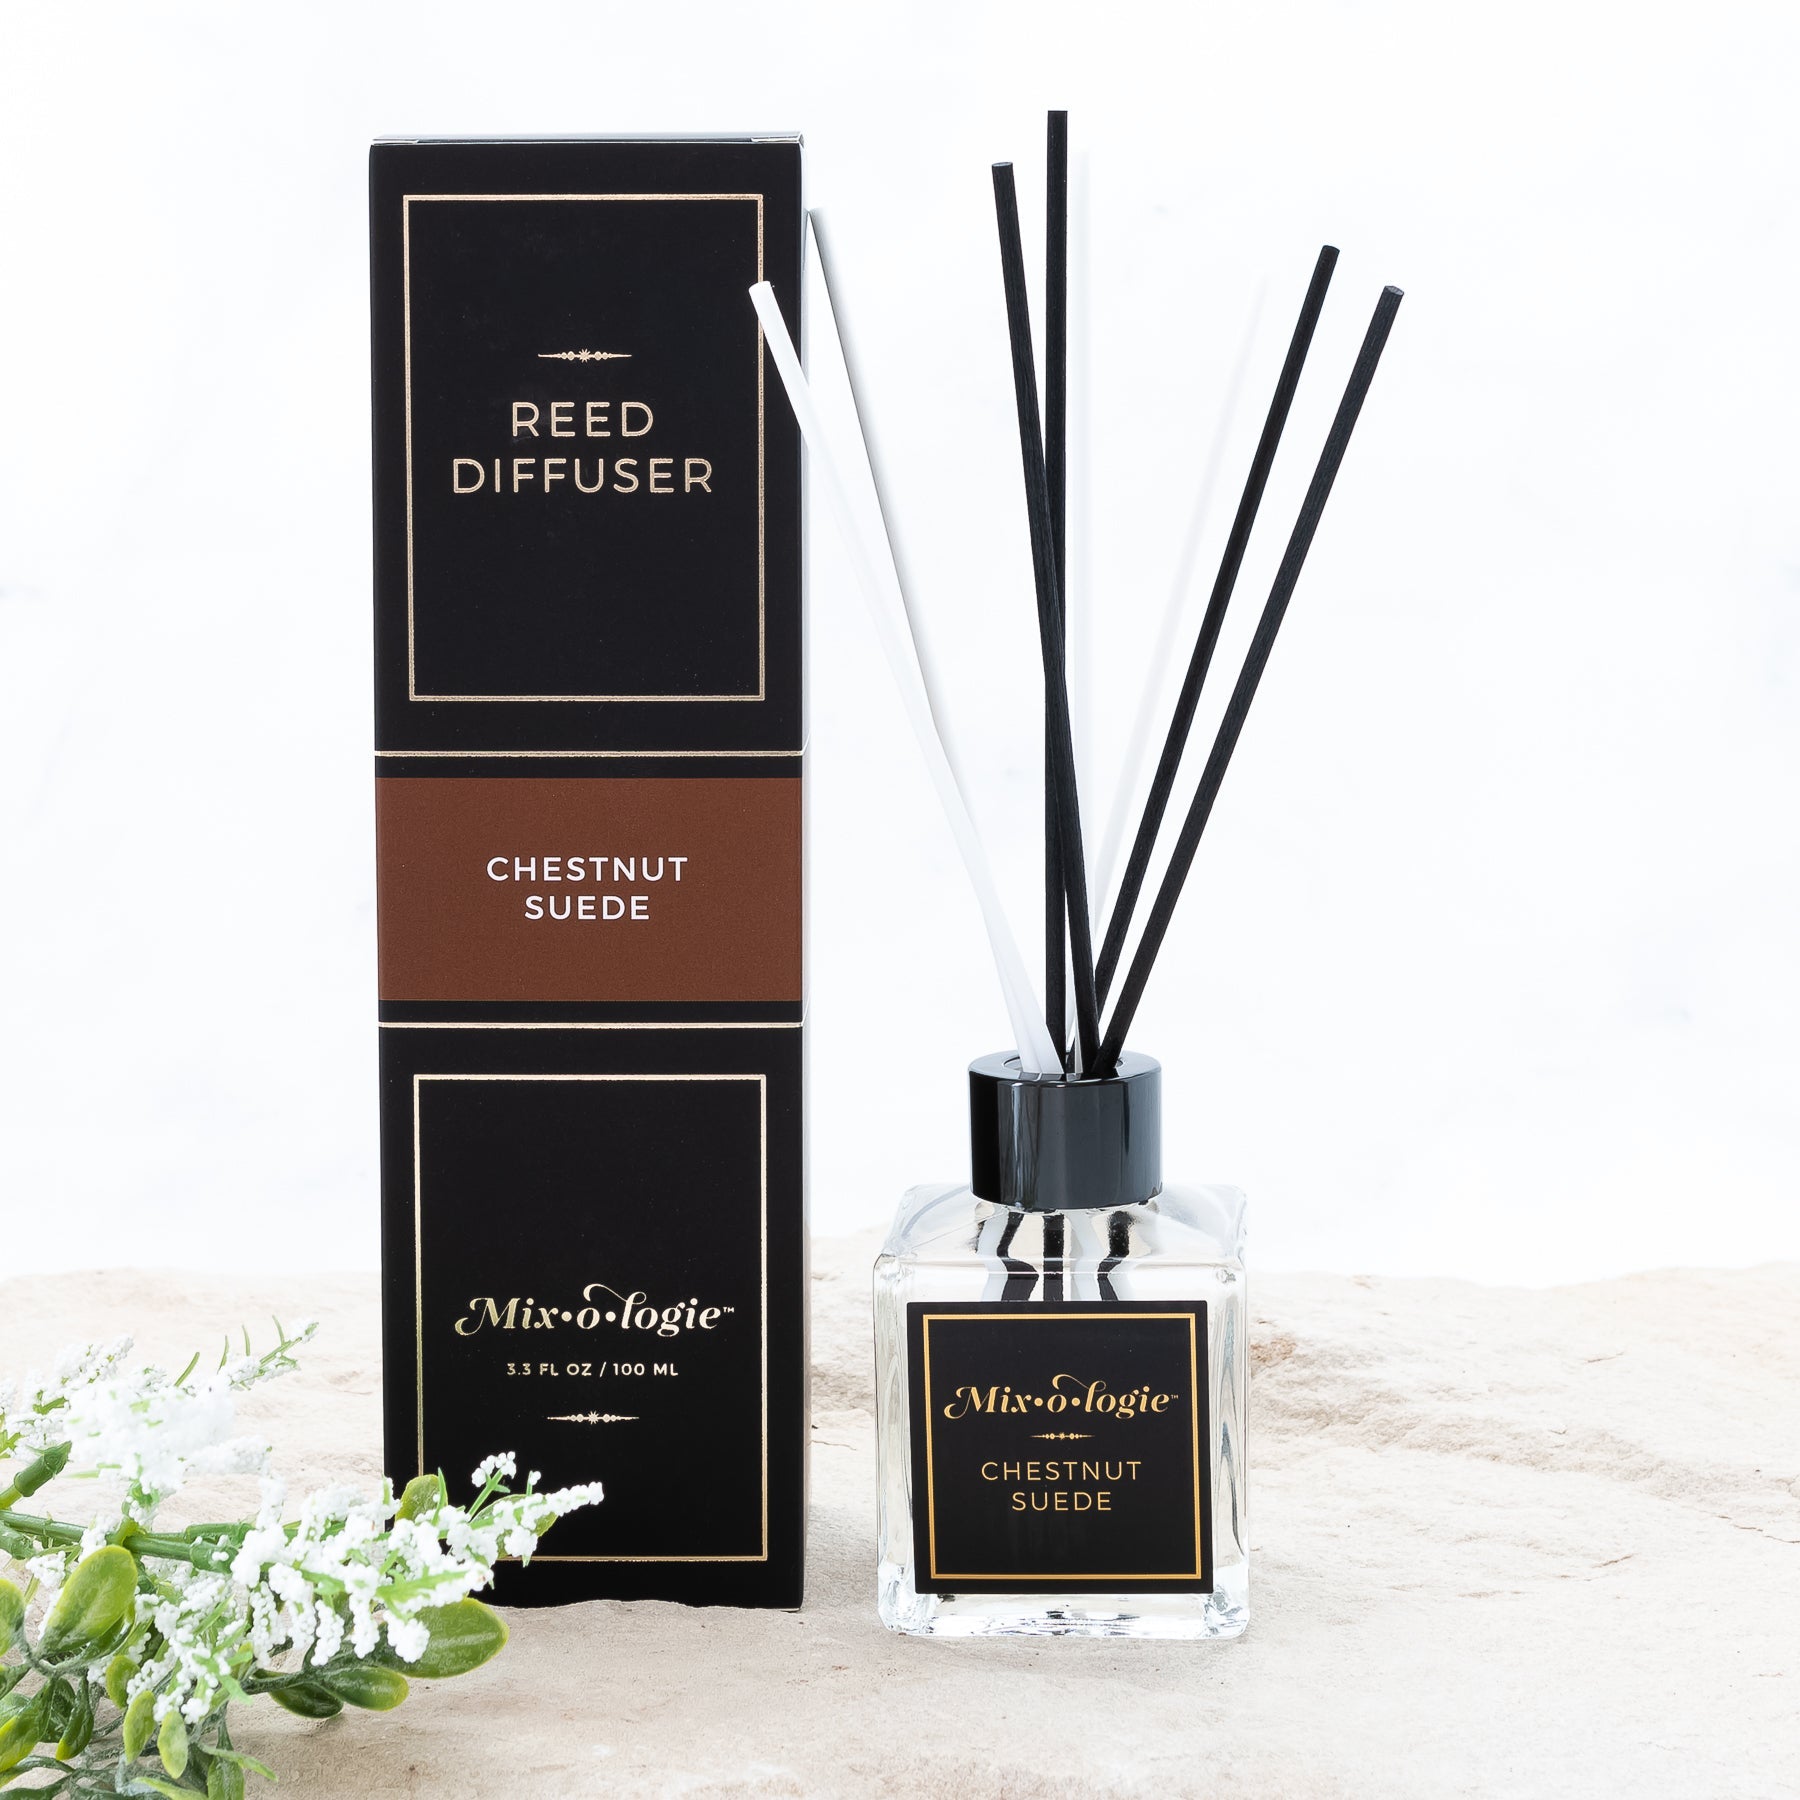 100 mL glass bottle reed diffuser scented with Mixologie's Chestnut Suede with 8 reed sticks.